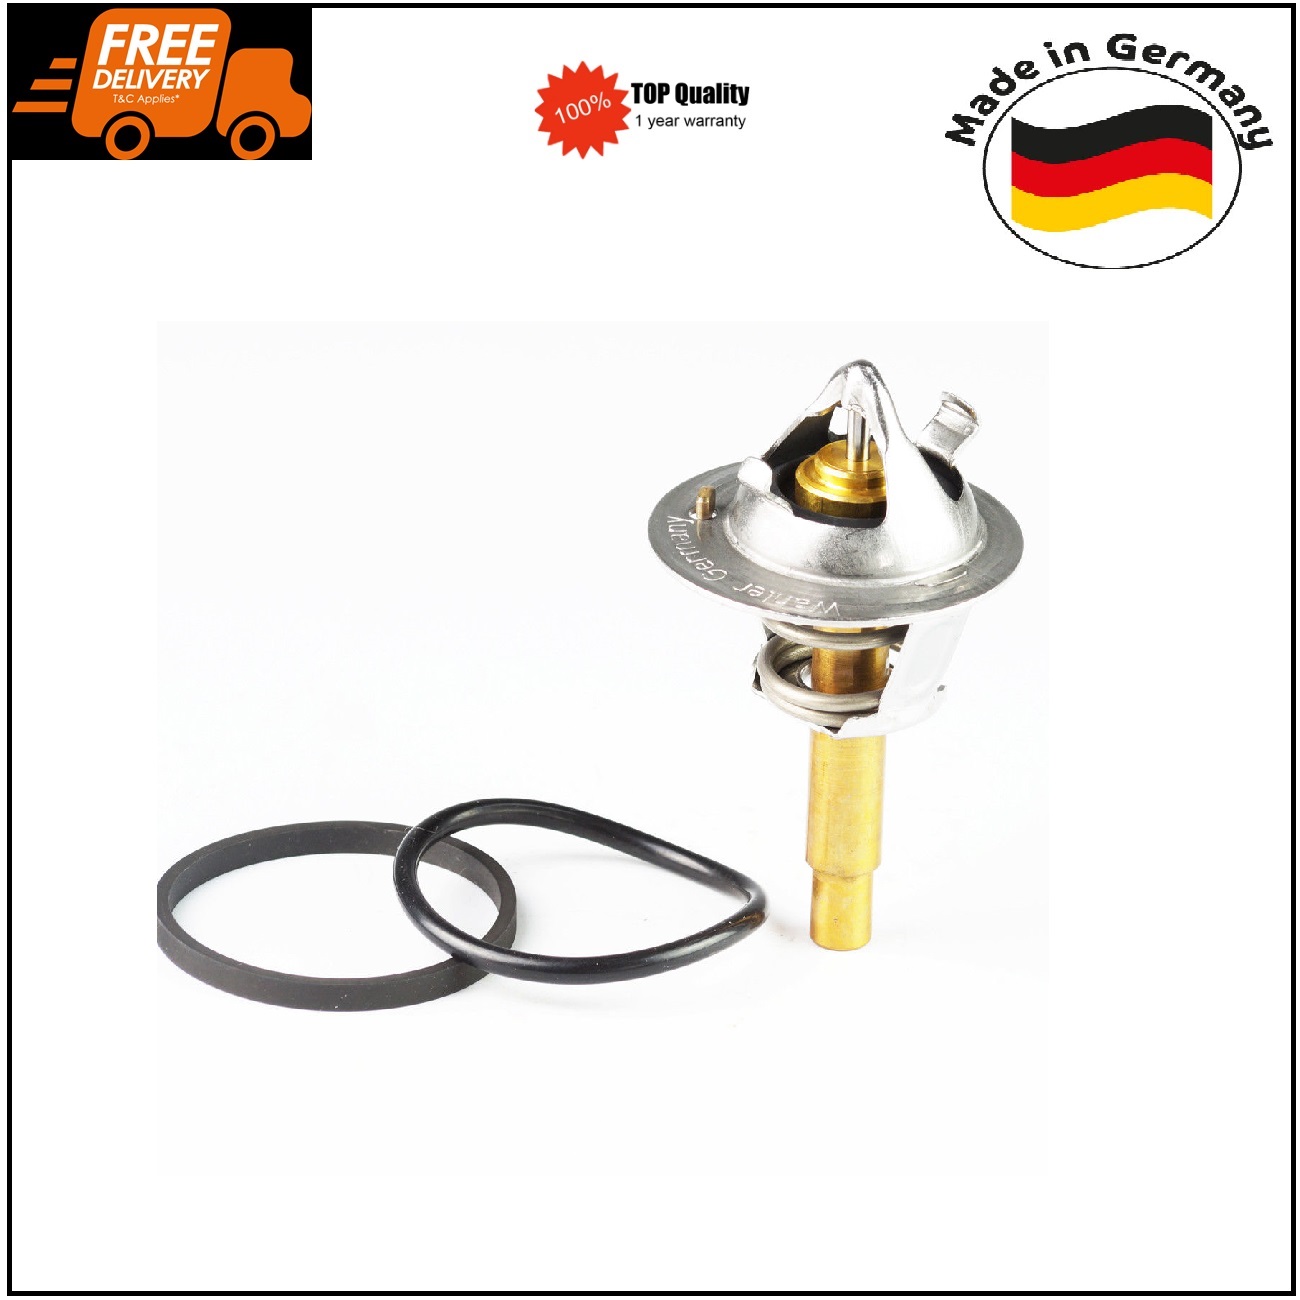 Thermostat for Mercedes A209 W203 W204 CL203 W211 R171 S204 2712030575 GERMAN MADE